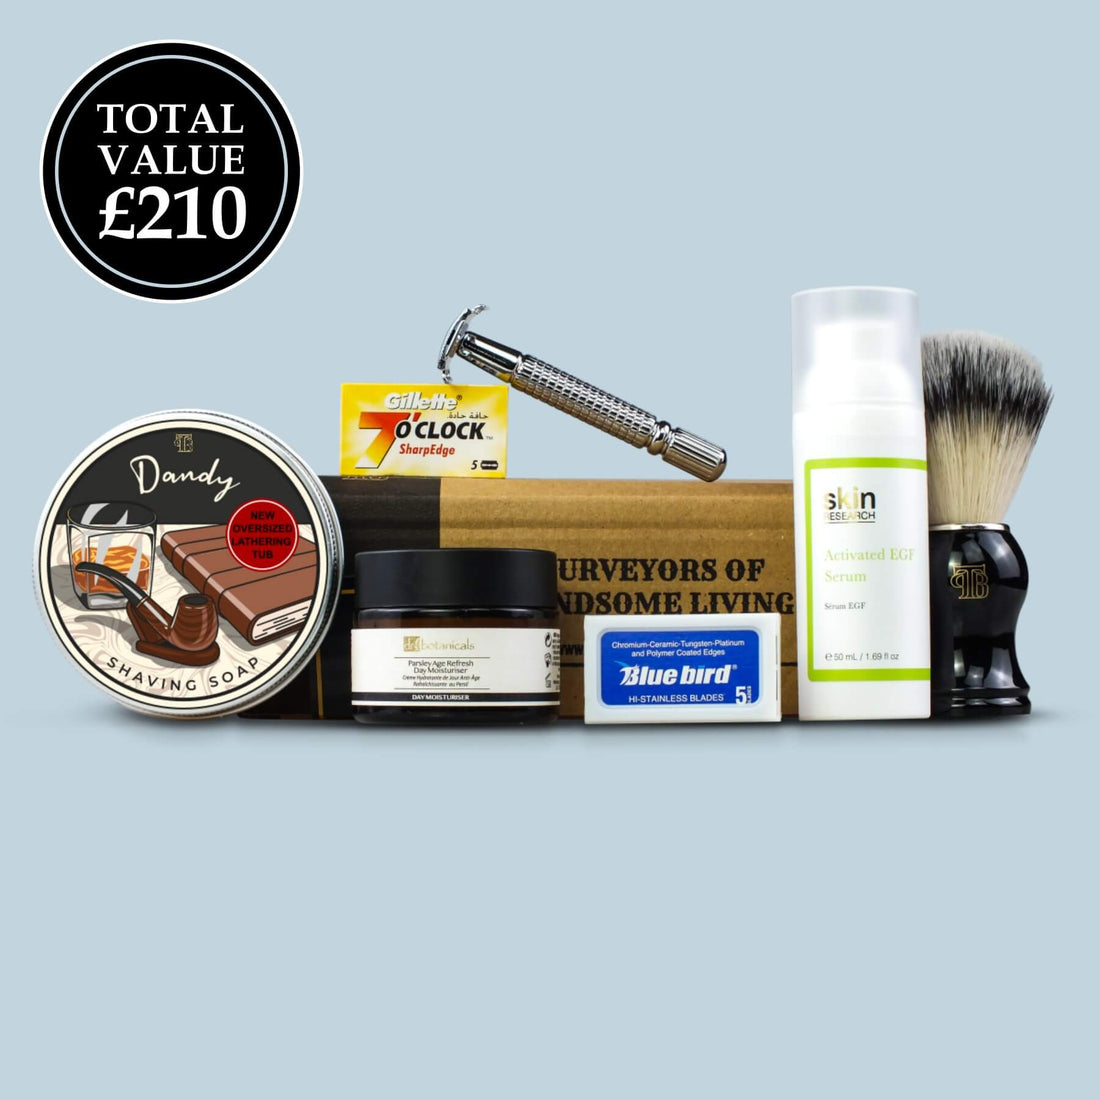 The complete shaving kit with july/aug '23 contents featuring dandy shaving soap, dr botanical men's moisturiser, men's EGF serum, our signature safety razor and cruelty-free shaving brush on a light blue background